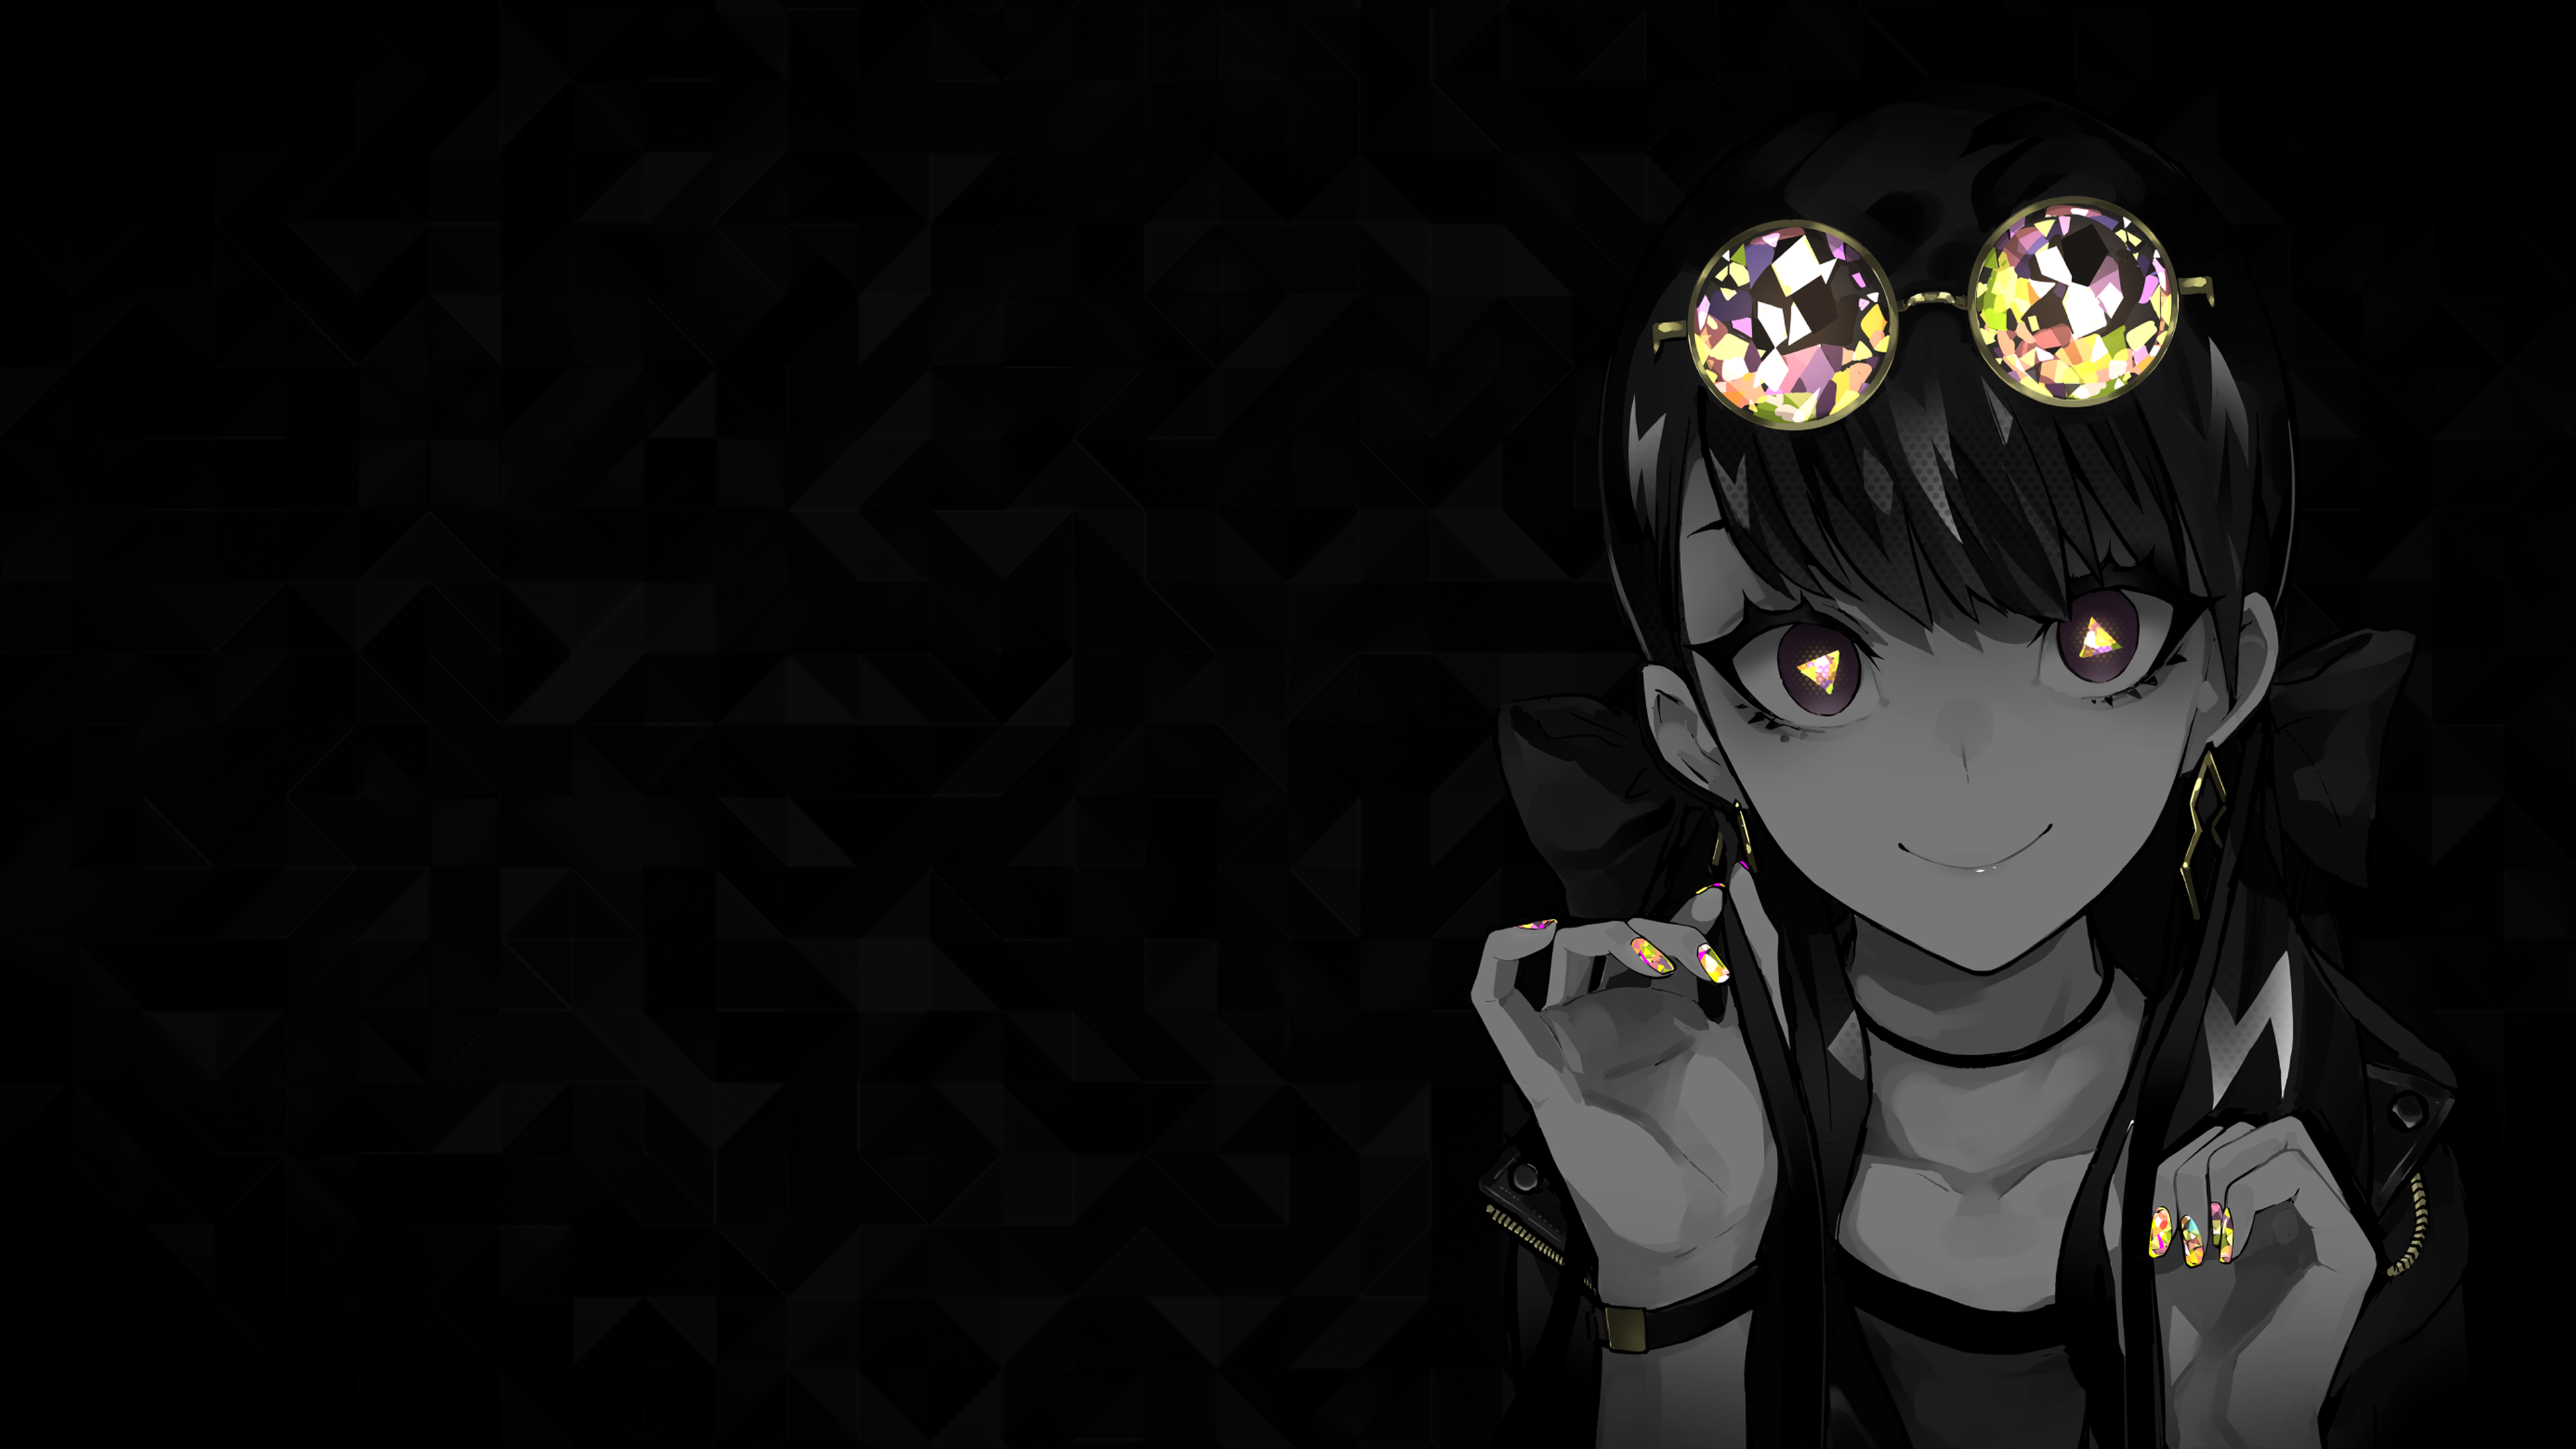 Anime 3840x2160 dark background simple background black background selective coloring anime girls